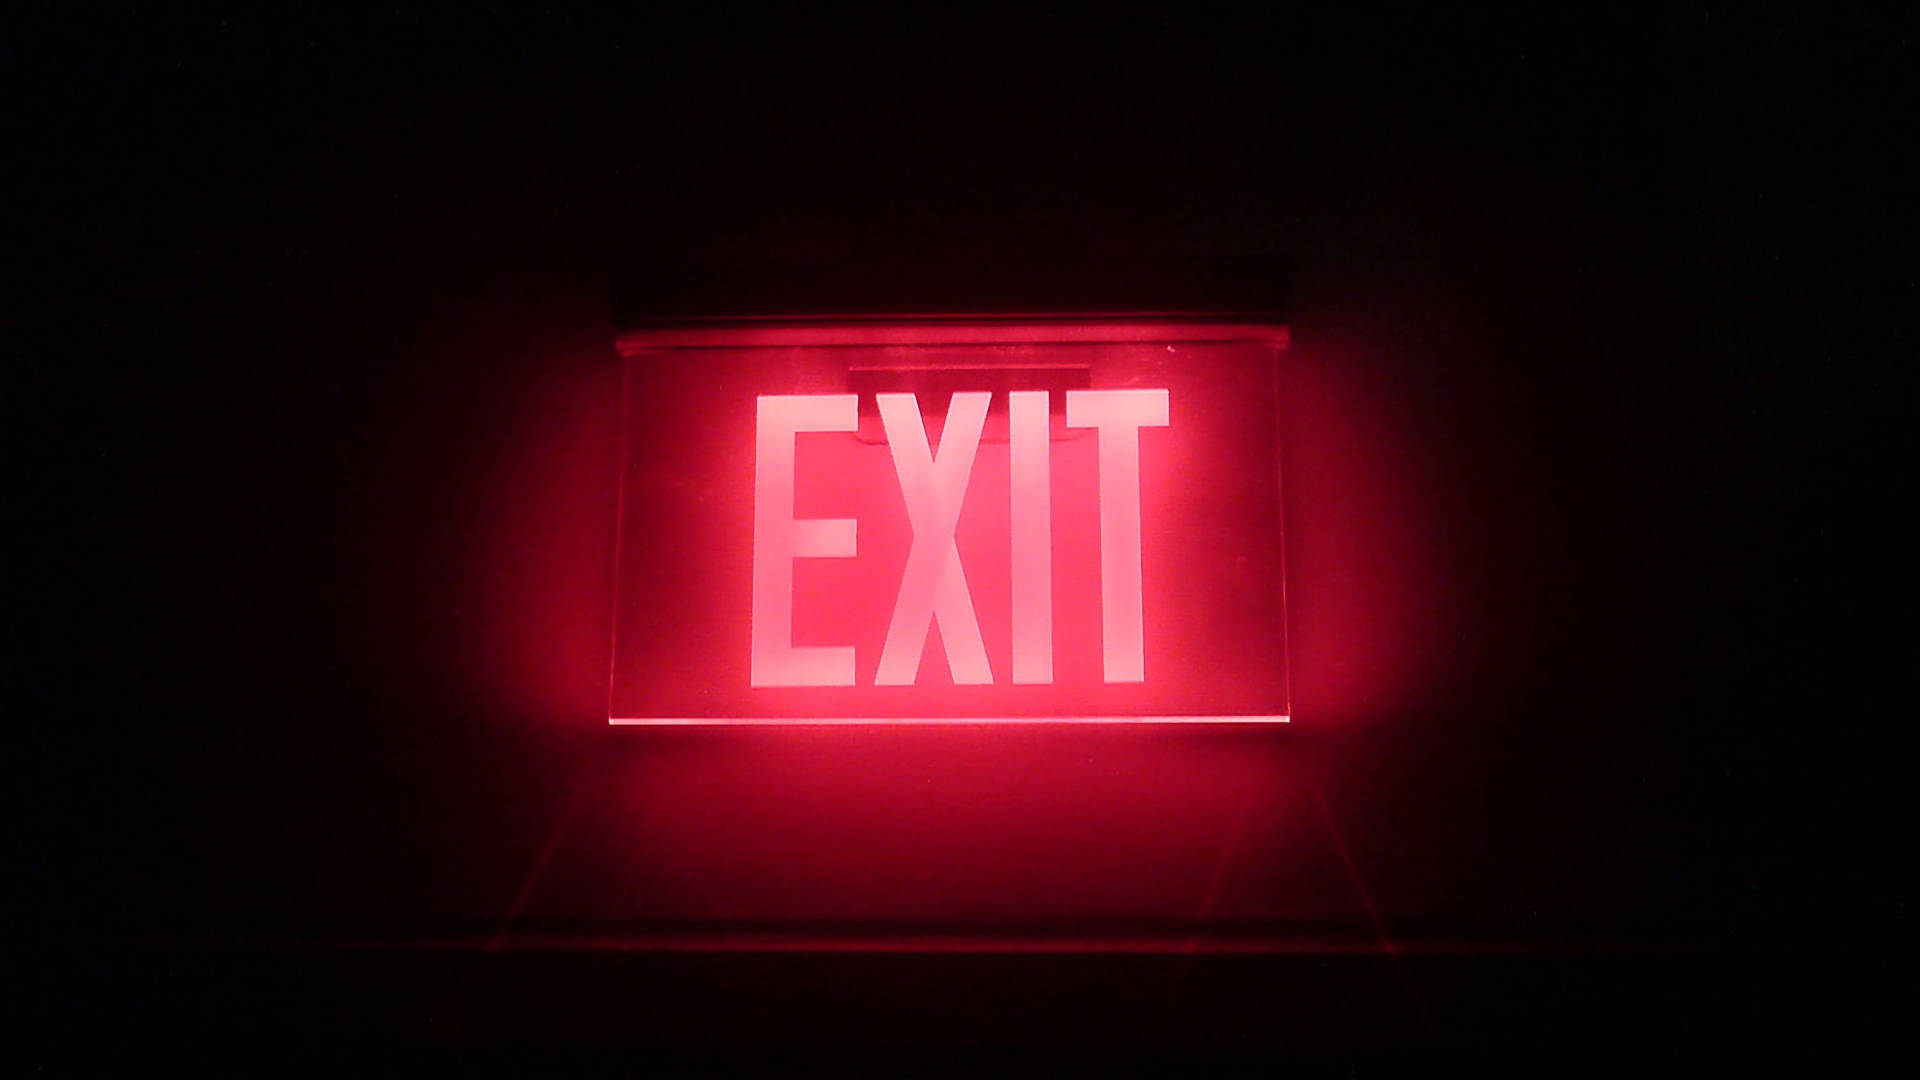 Illuminated Exit Sign Displayed on Black Tablet Screen Wallpaper